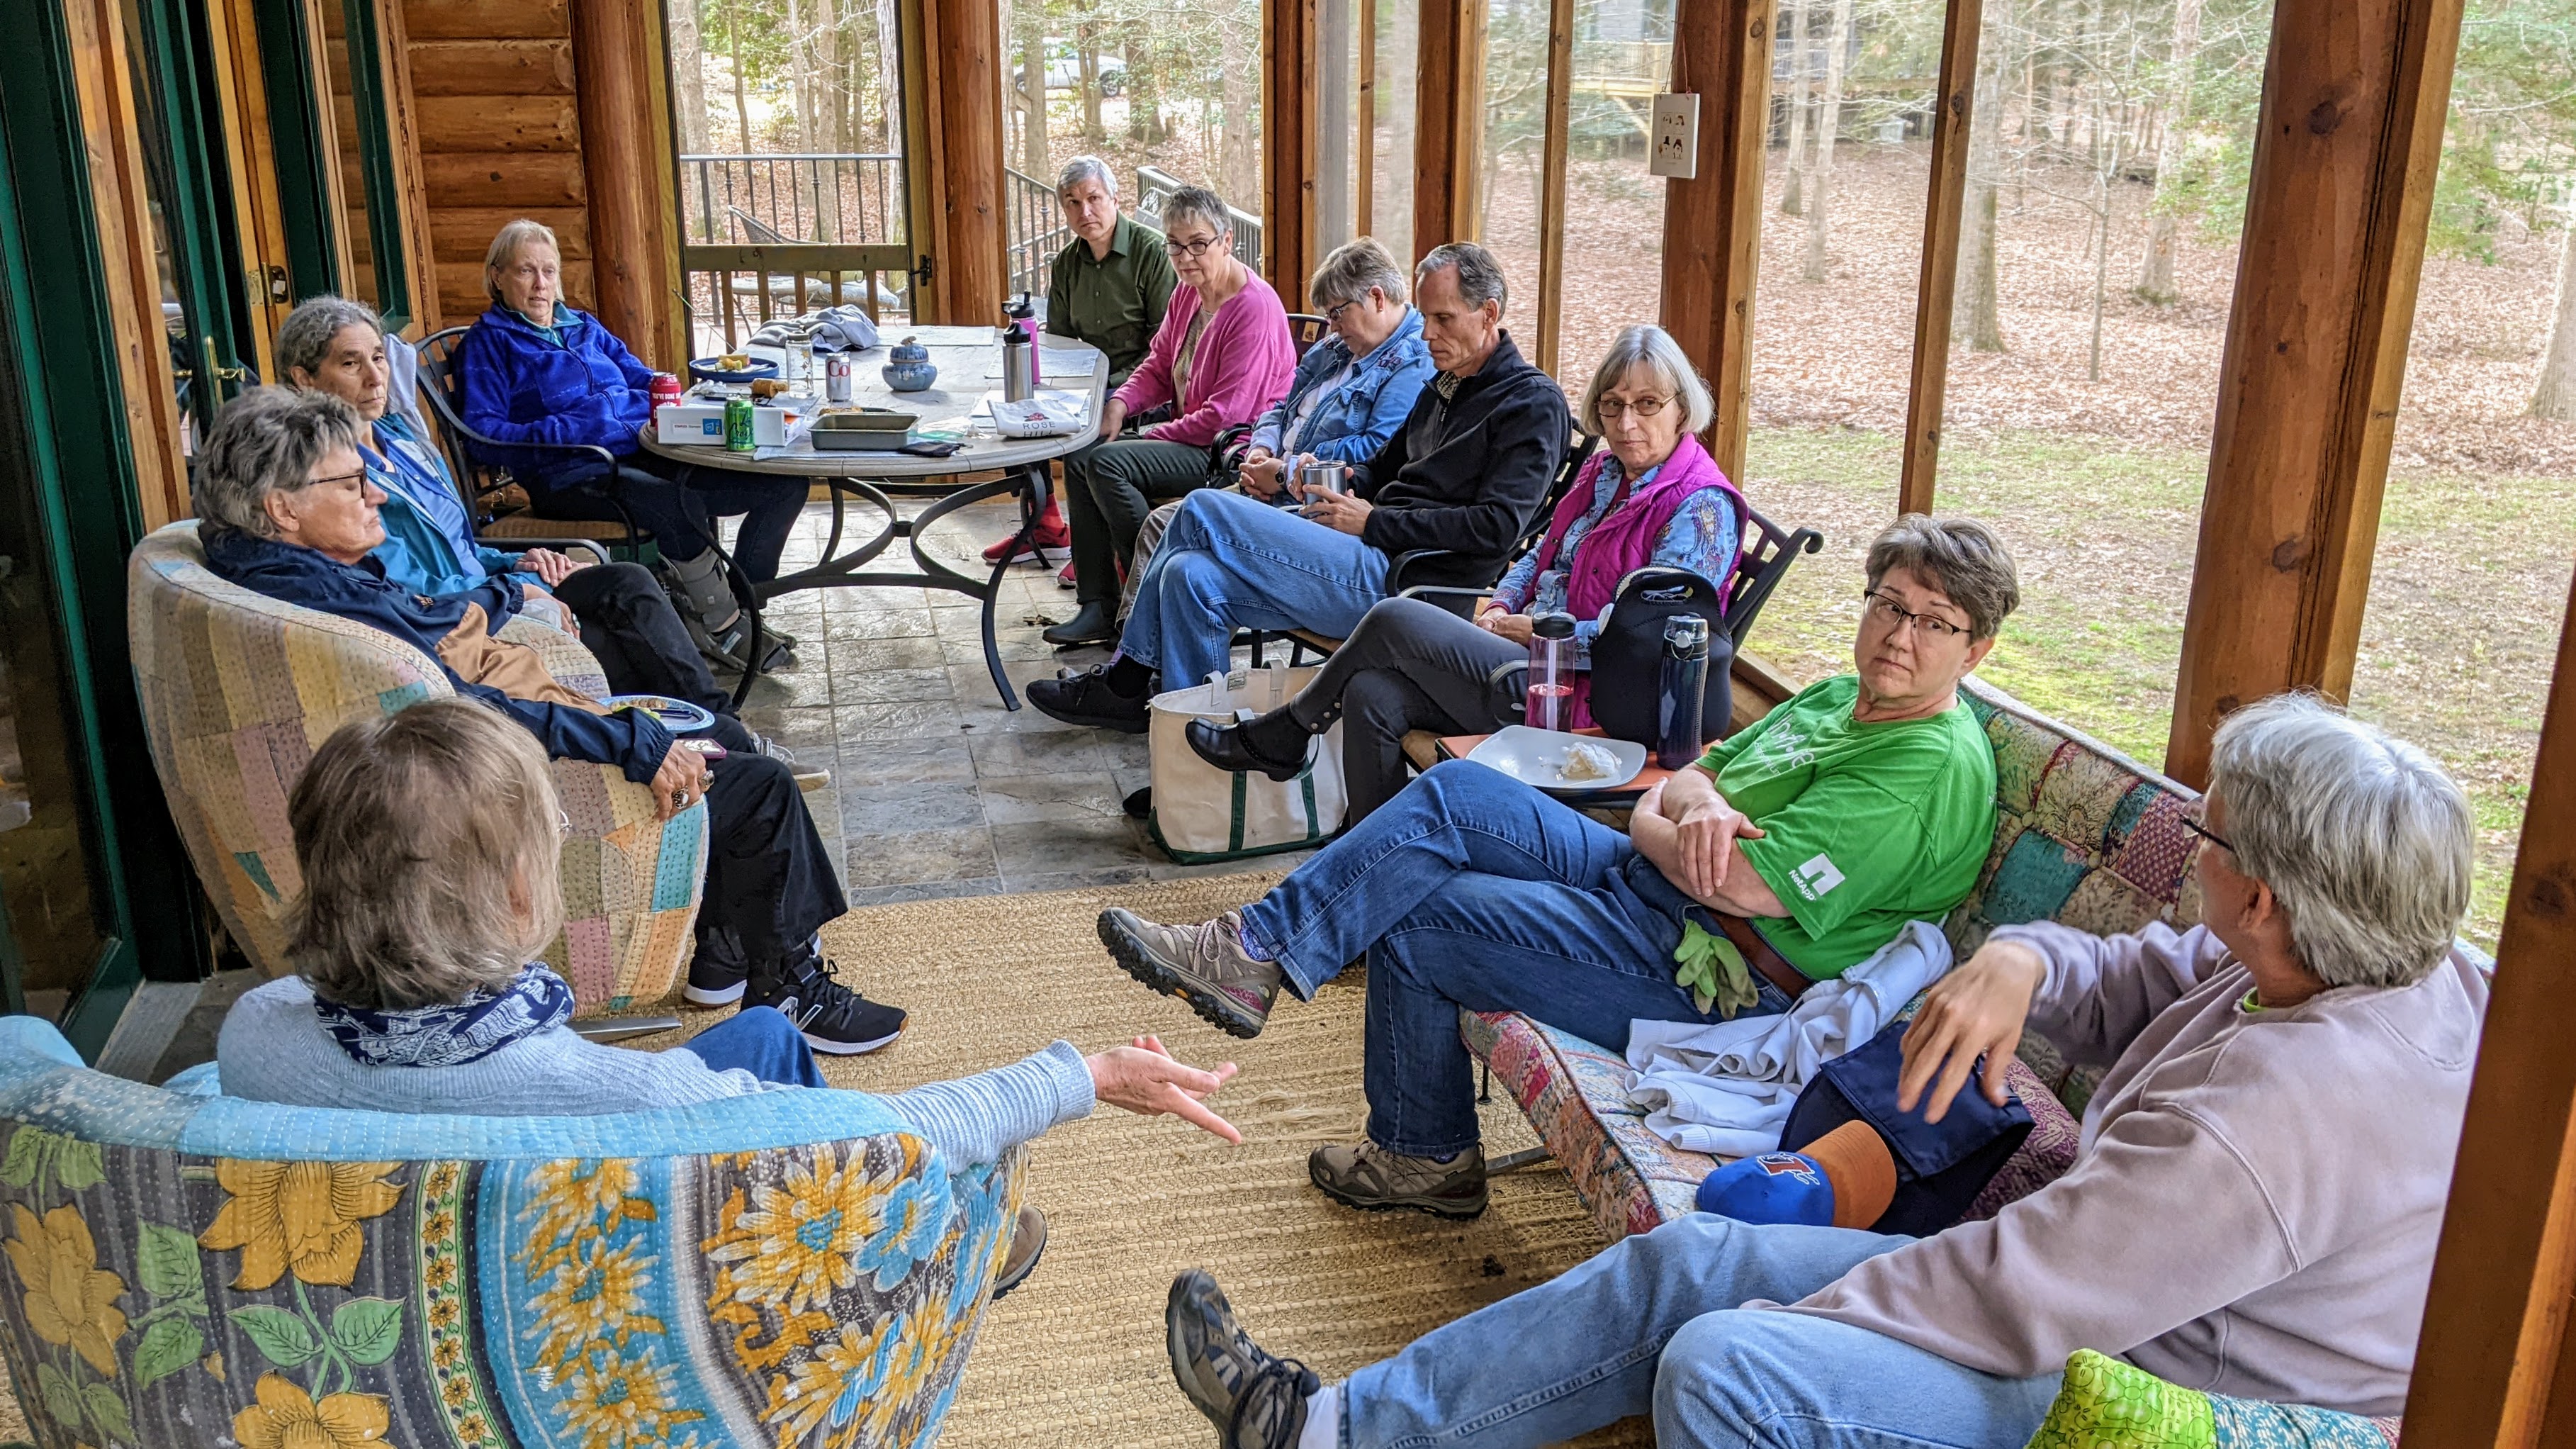 Group of people meeting together on a screened porch.